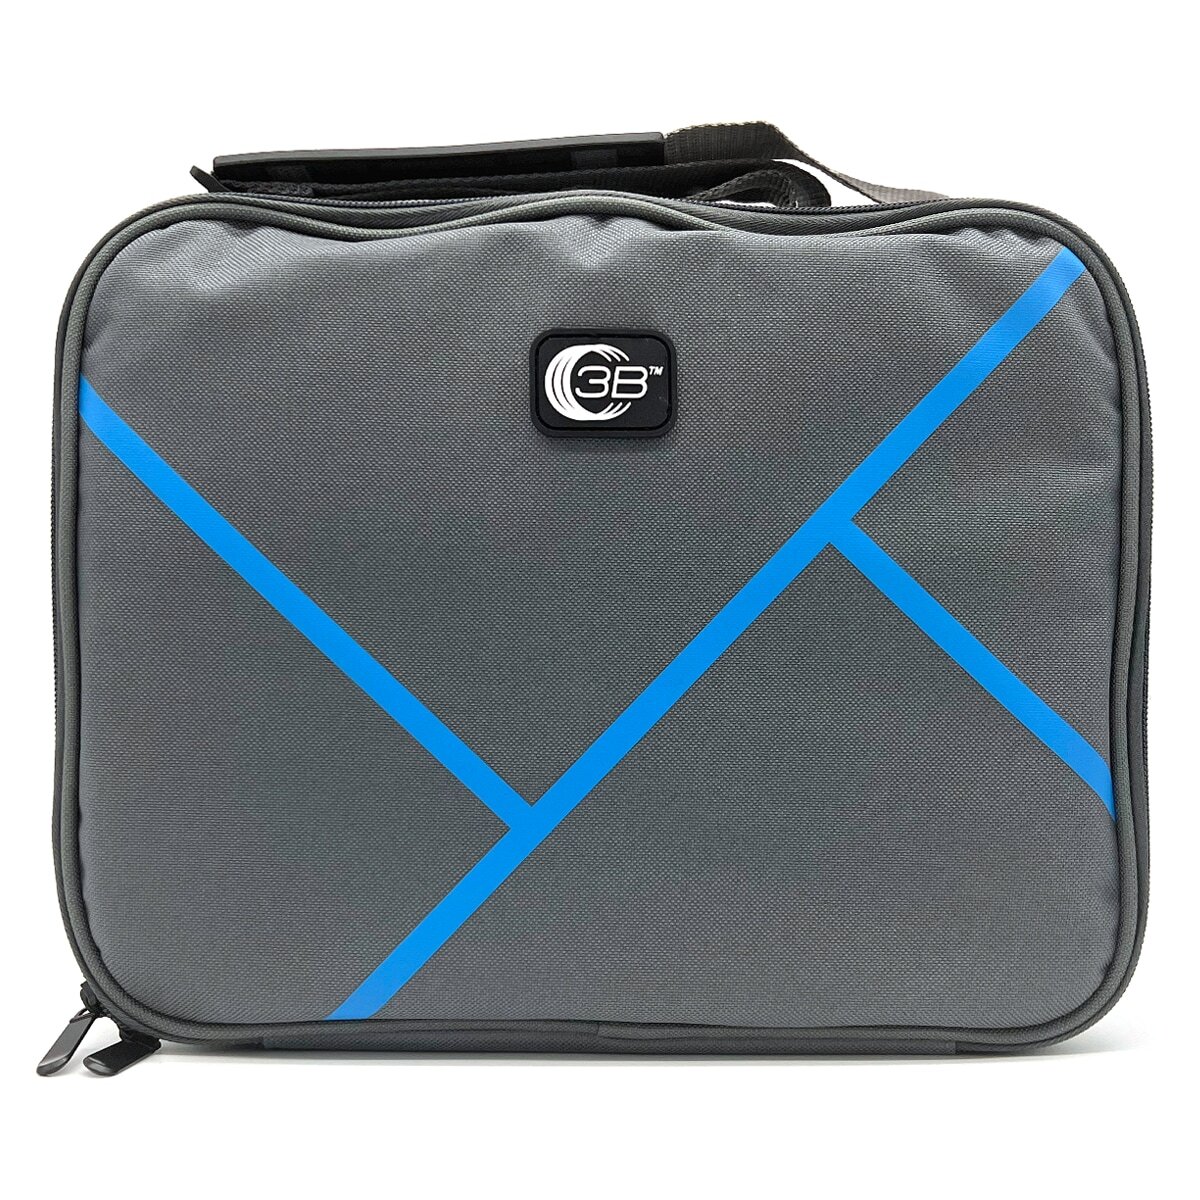 This Travel Bag from 3B Medical is designed for use with all Luna G3 CPAP &amp; BiPAP machines.